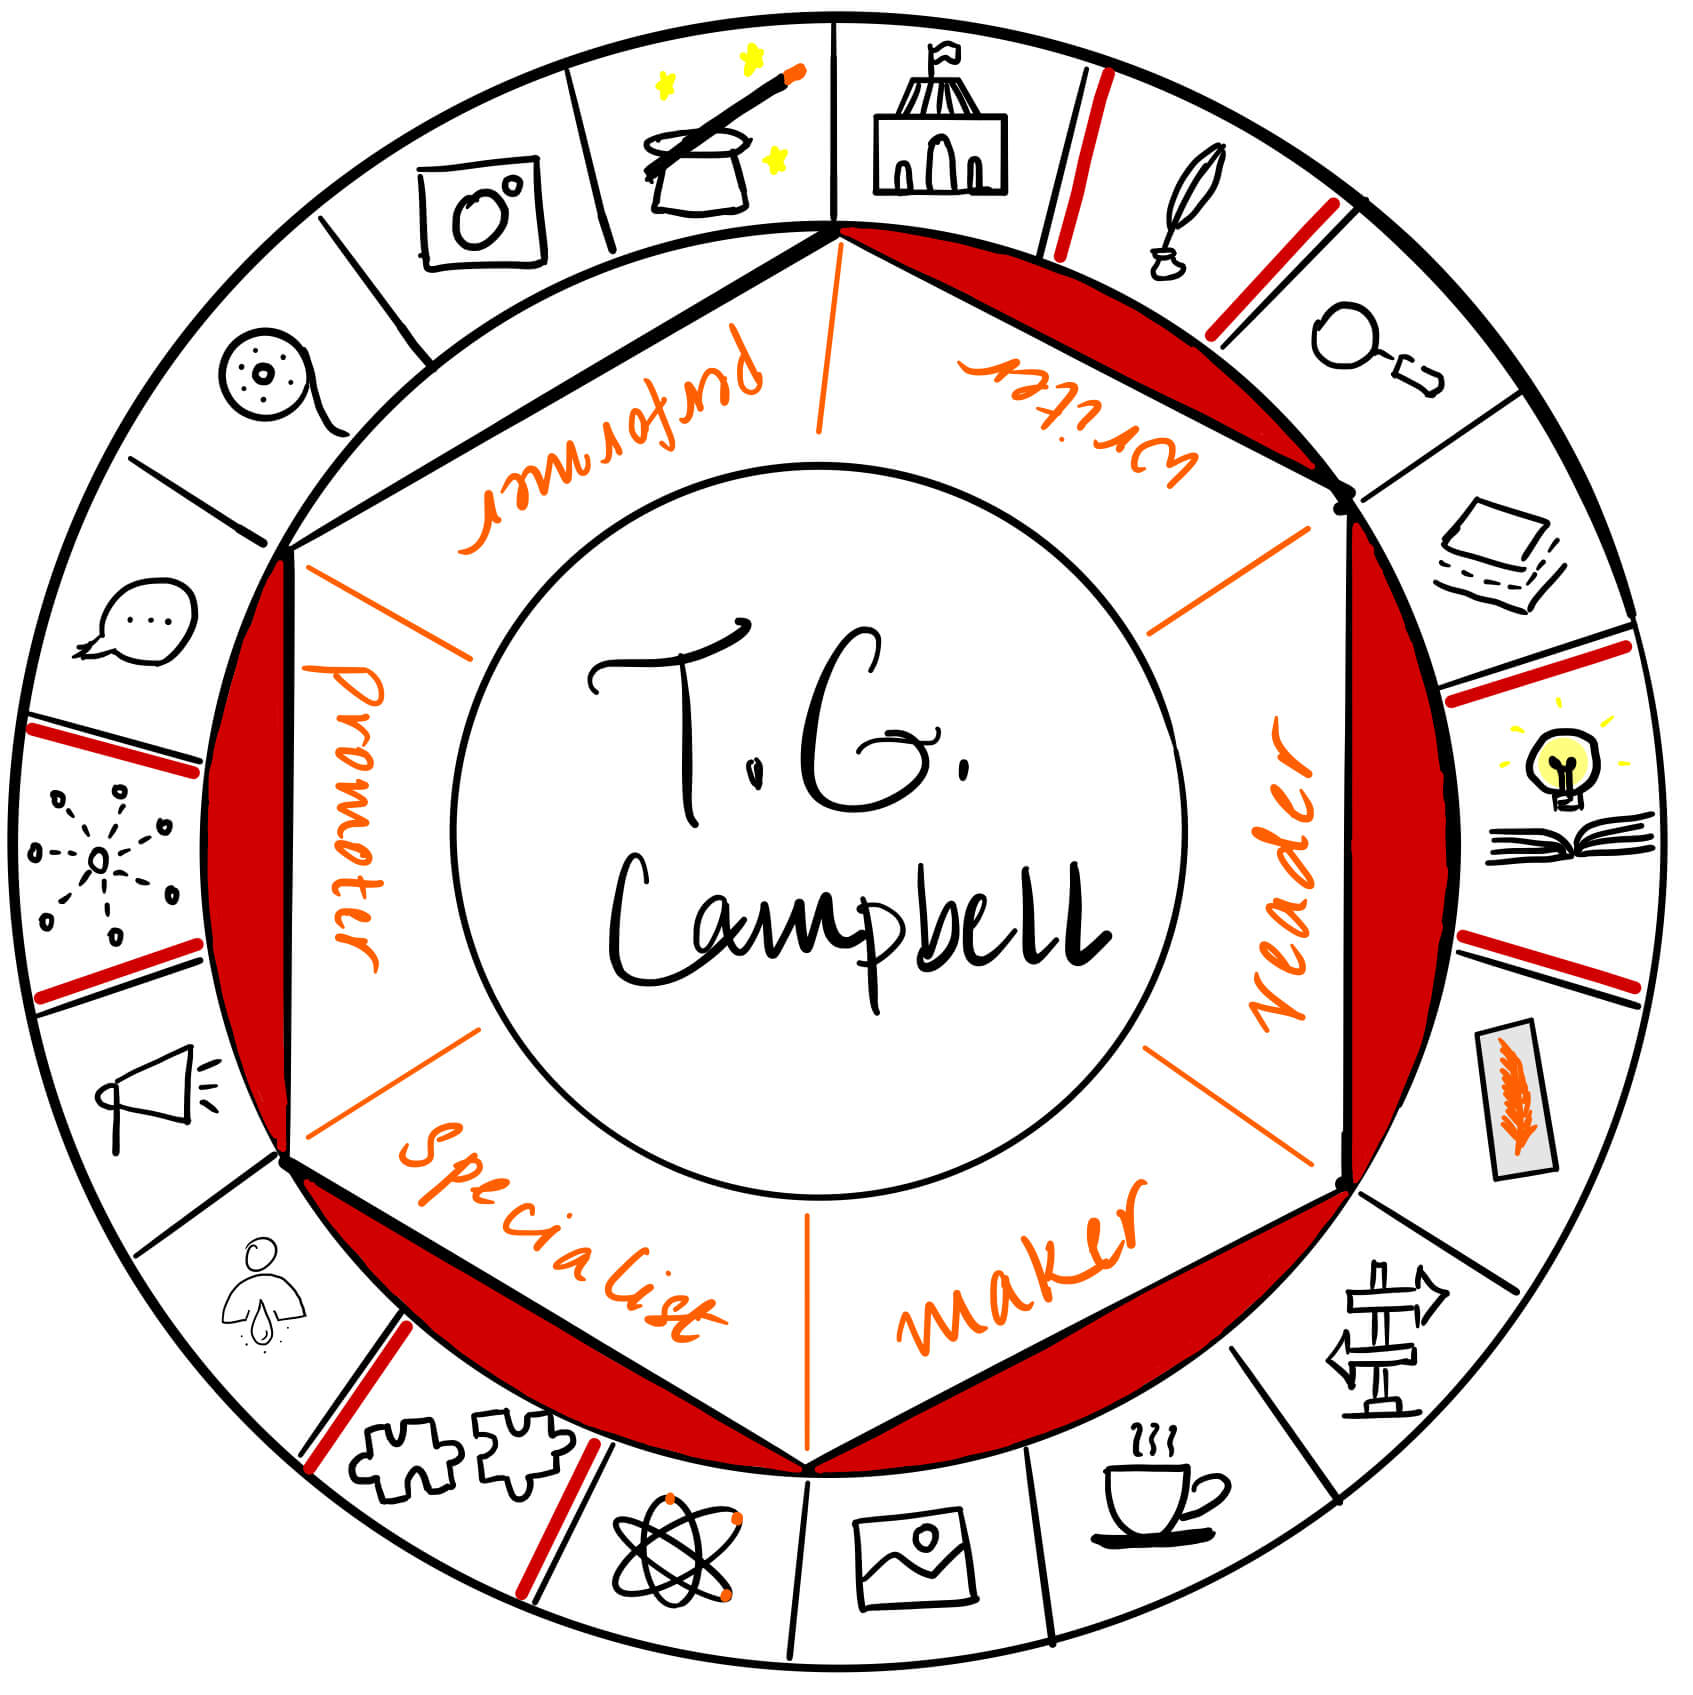 T. G. Campbell is a promoter, writer, maker, reader and specialist. It's a pleasure to have her over on The Creator's Roulette to talk about writing a well researched book.